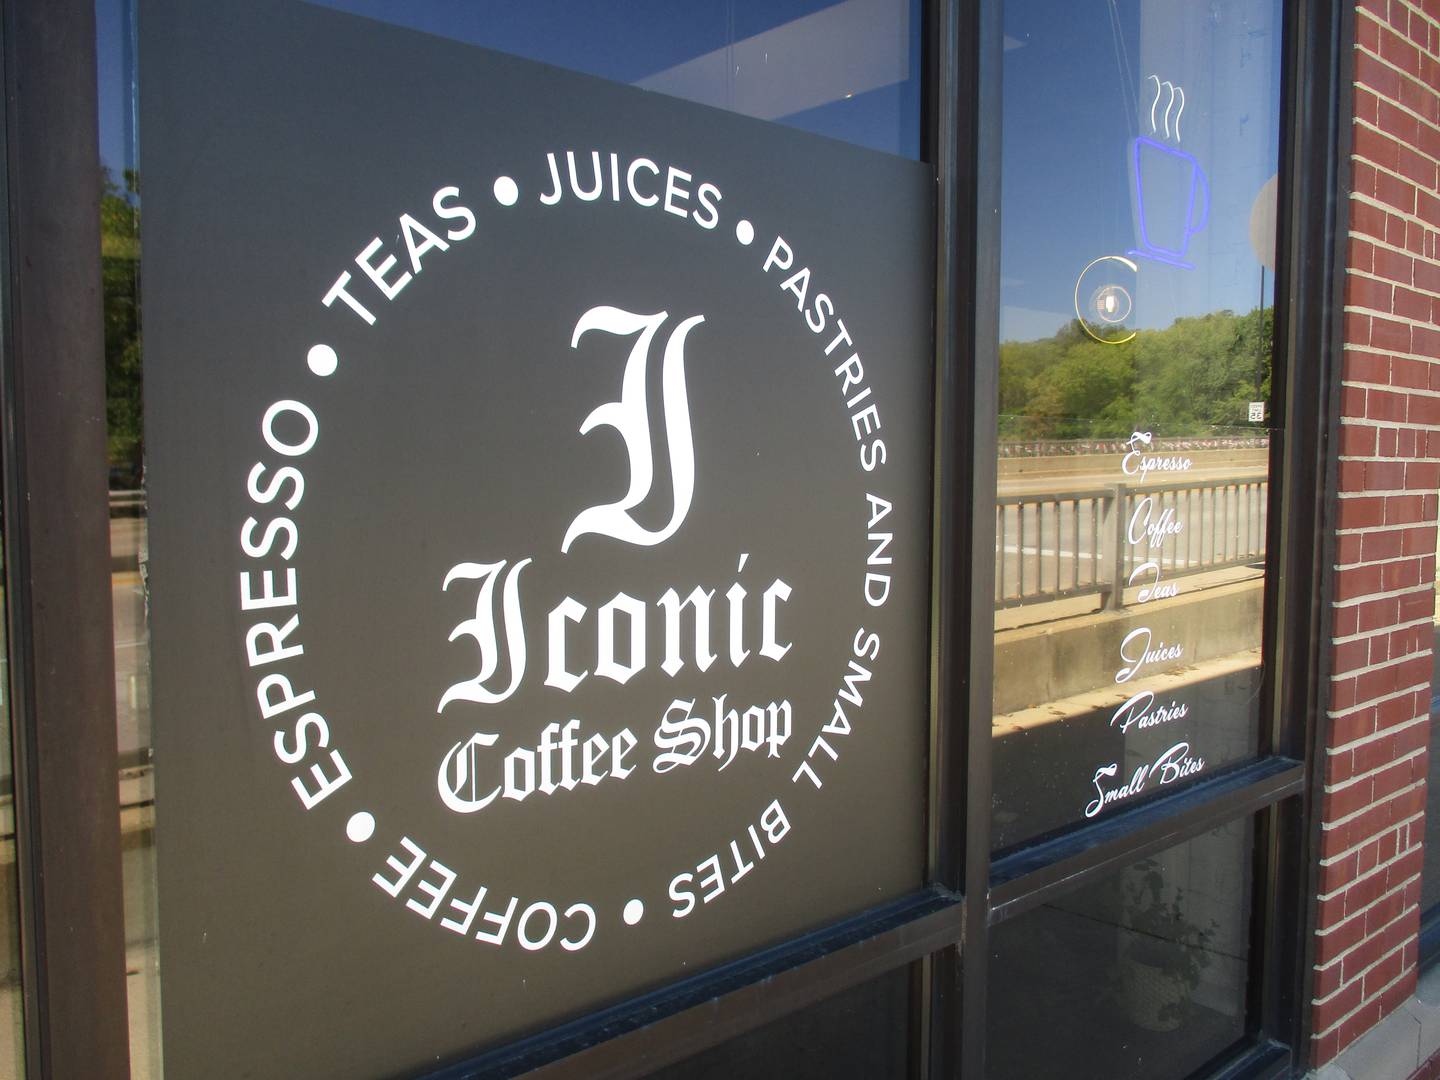 Iconic Coffee Shop is located at 109 S. Bridge St. in downtown Yorkville. The shop is open from 7 a.m. to 4 p.m. every day.